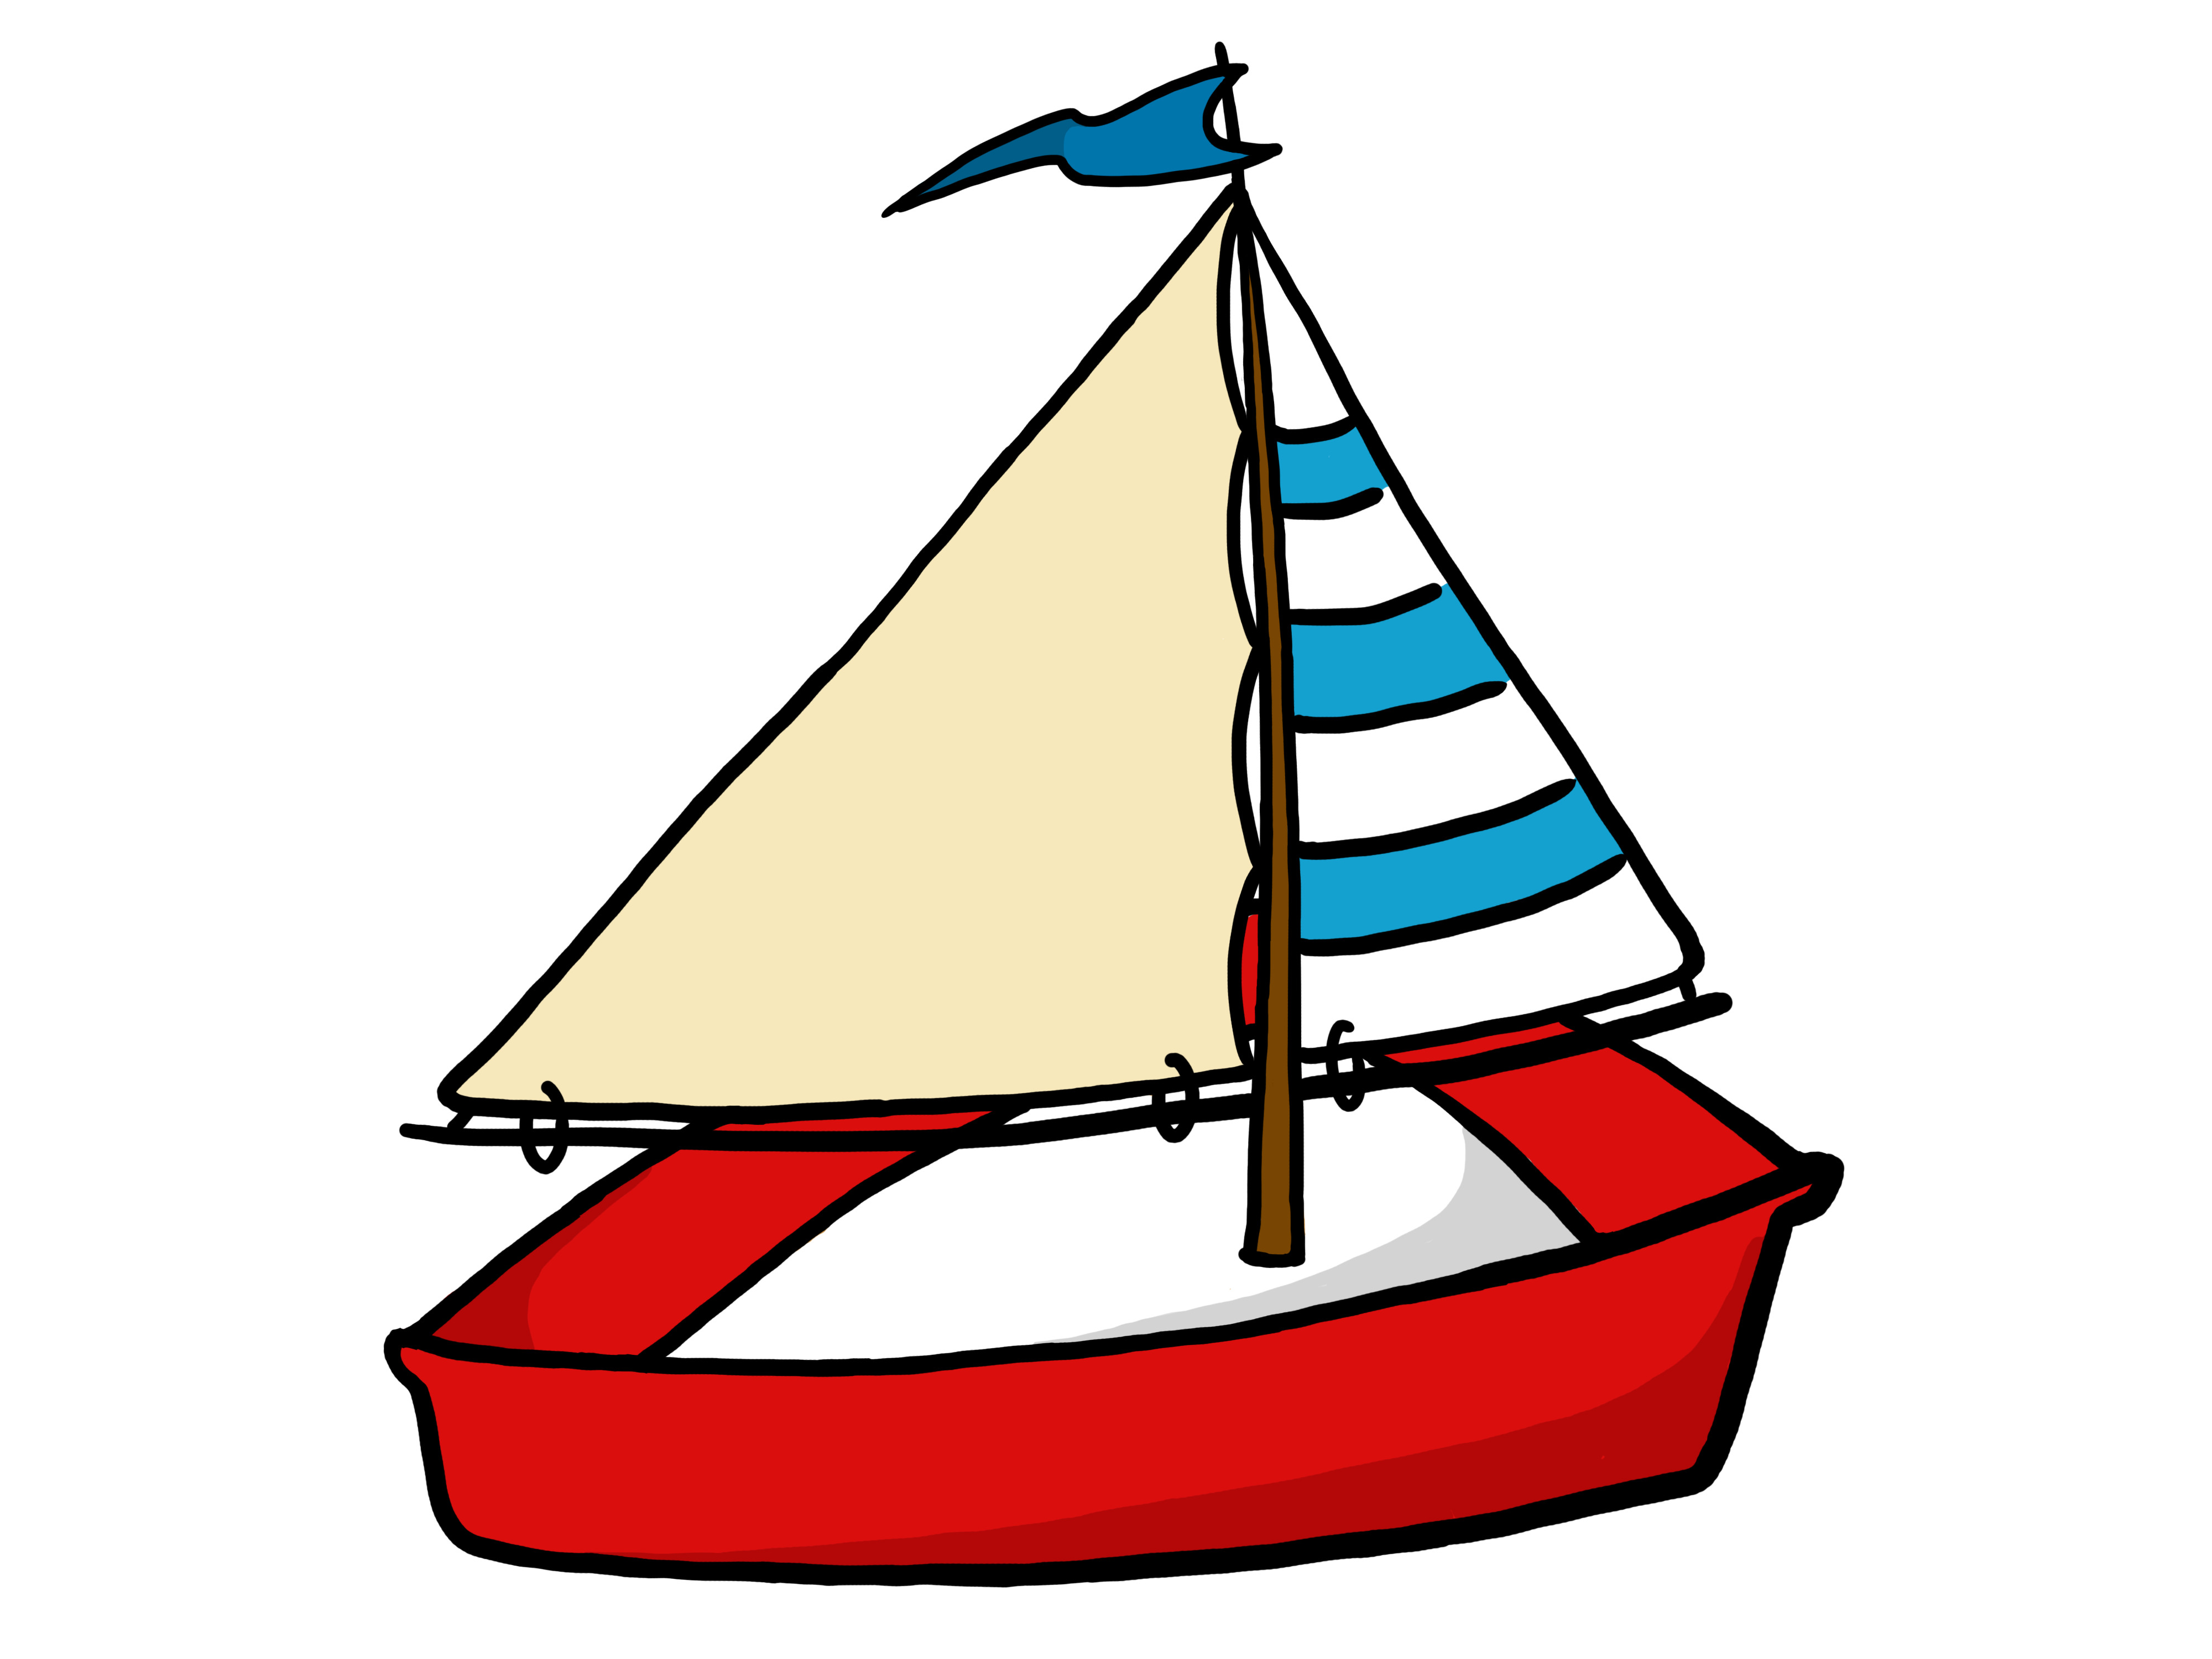 Boats clipart underwater. Boating panda free images